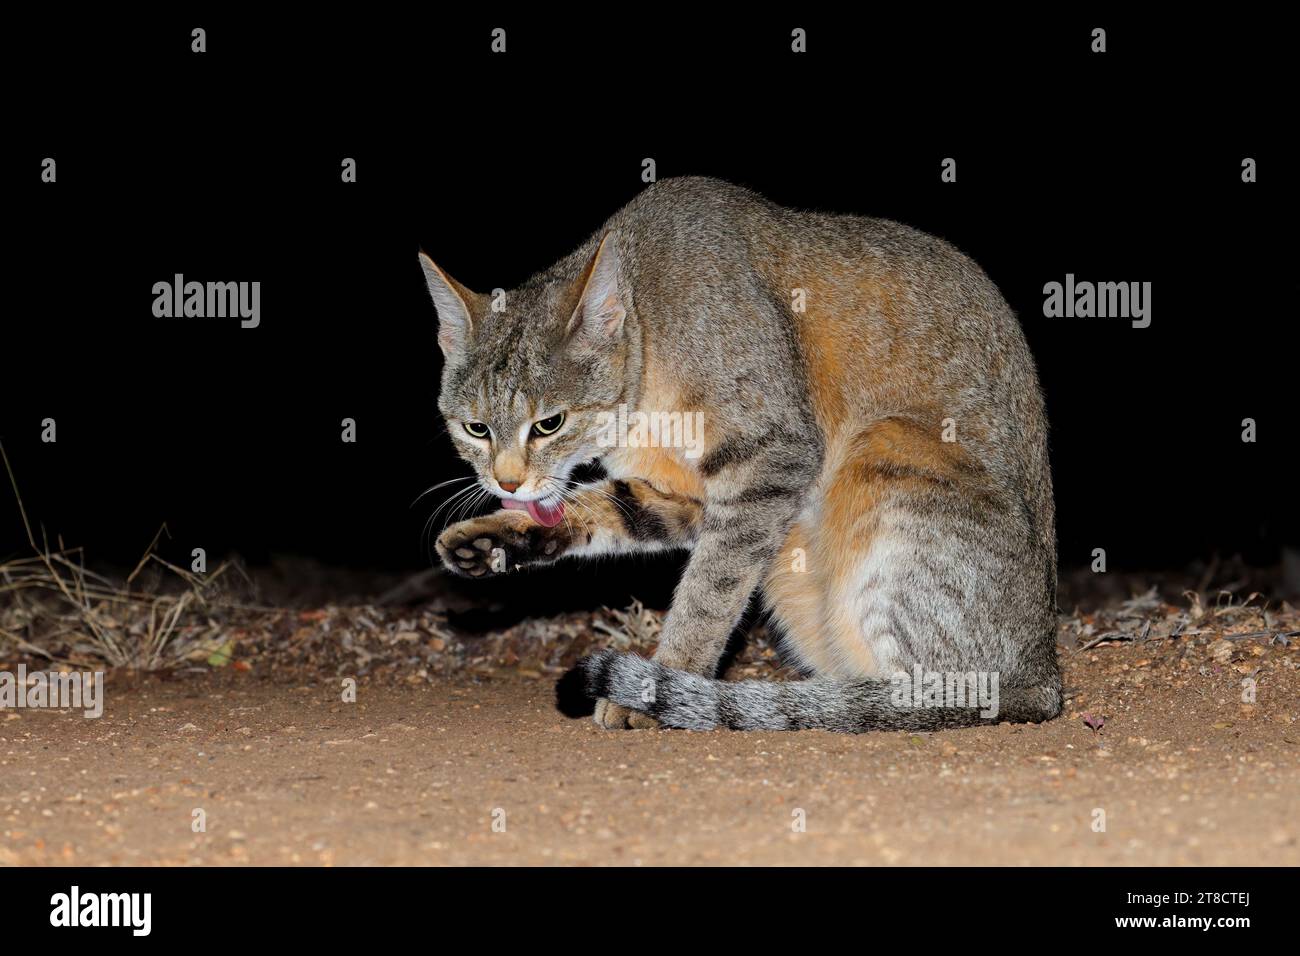 An African wild cat (Felis silvestris lybica) during the night, Kruger National Park, South Africa Stock Photo